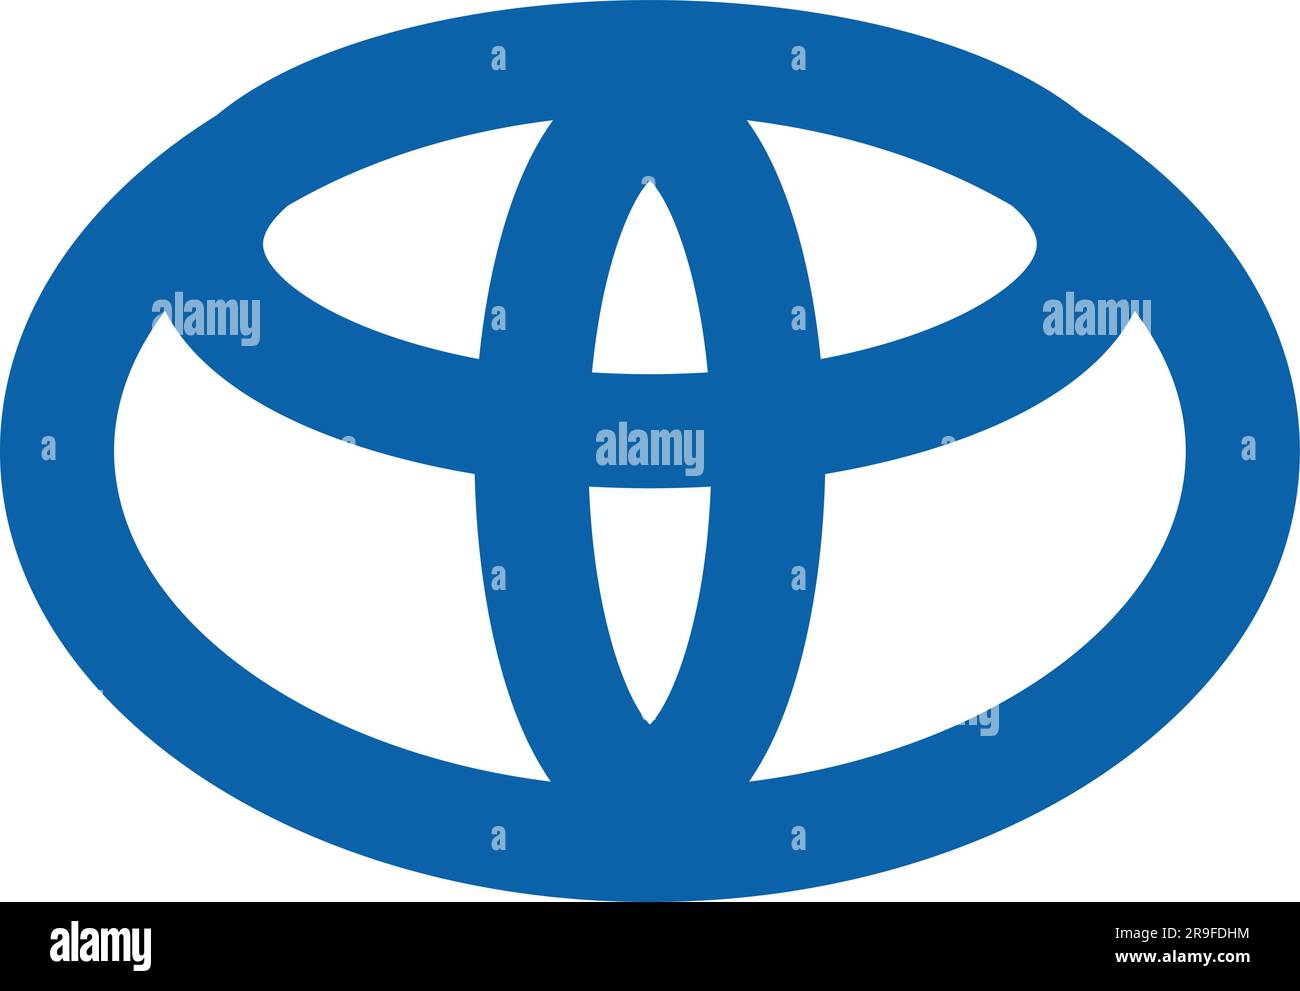 Toyota logo icon car brand sign symbol famous label identity style Top automotive industry leader art design vector. Black automobile emblem sign Stock Vector